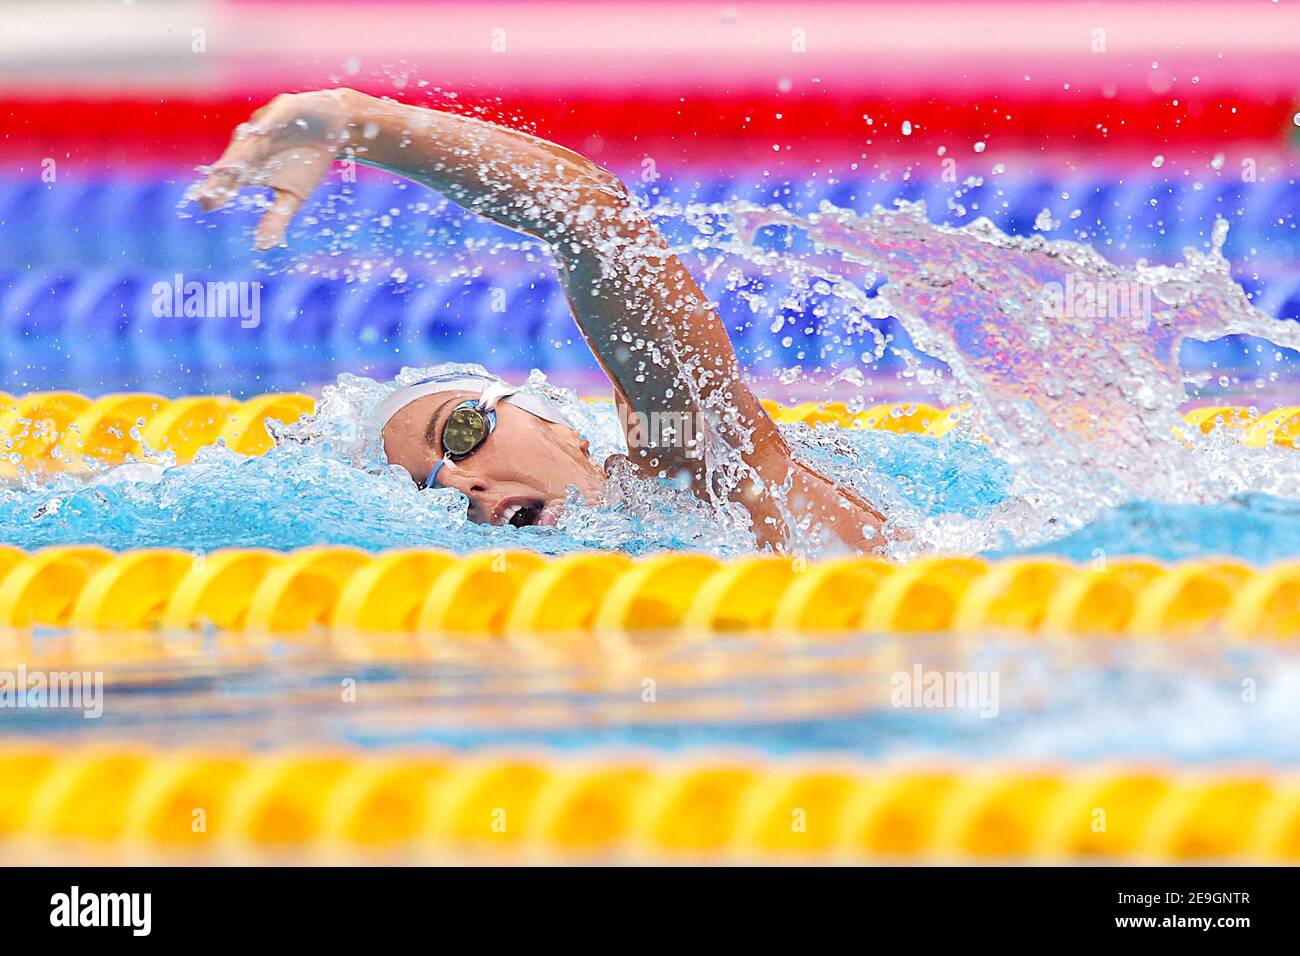 Italy's Alessai Filippi wins the gold medal on women's 400 meters medley during the european swimming championships in Budapest, Hungary, on July 31, 2006. Photo by Nicolas Gouhier/Cameleon/ABACAPRESS.COM Stock Photo